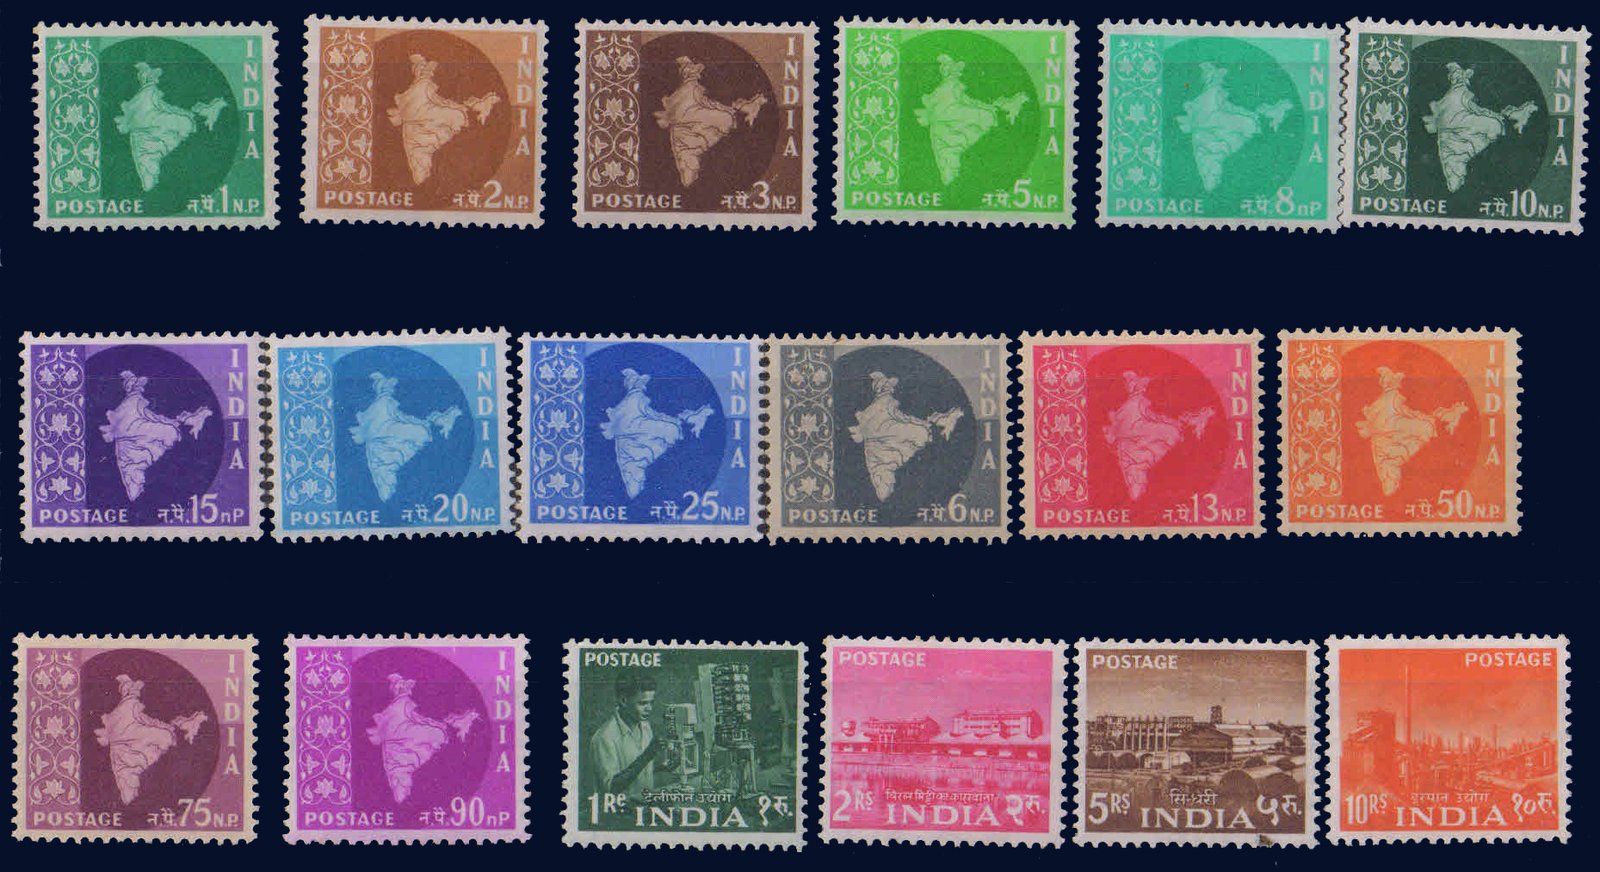 INDIA 1958-3rd Definitive Map Series, Ashokan Watermark, Complete set of 18 Stamps, Mint Hinged, 1 N.P. to 10 Rs., as per scan